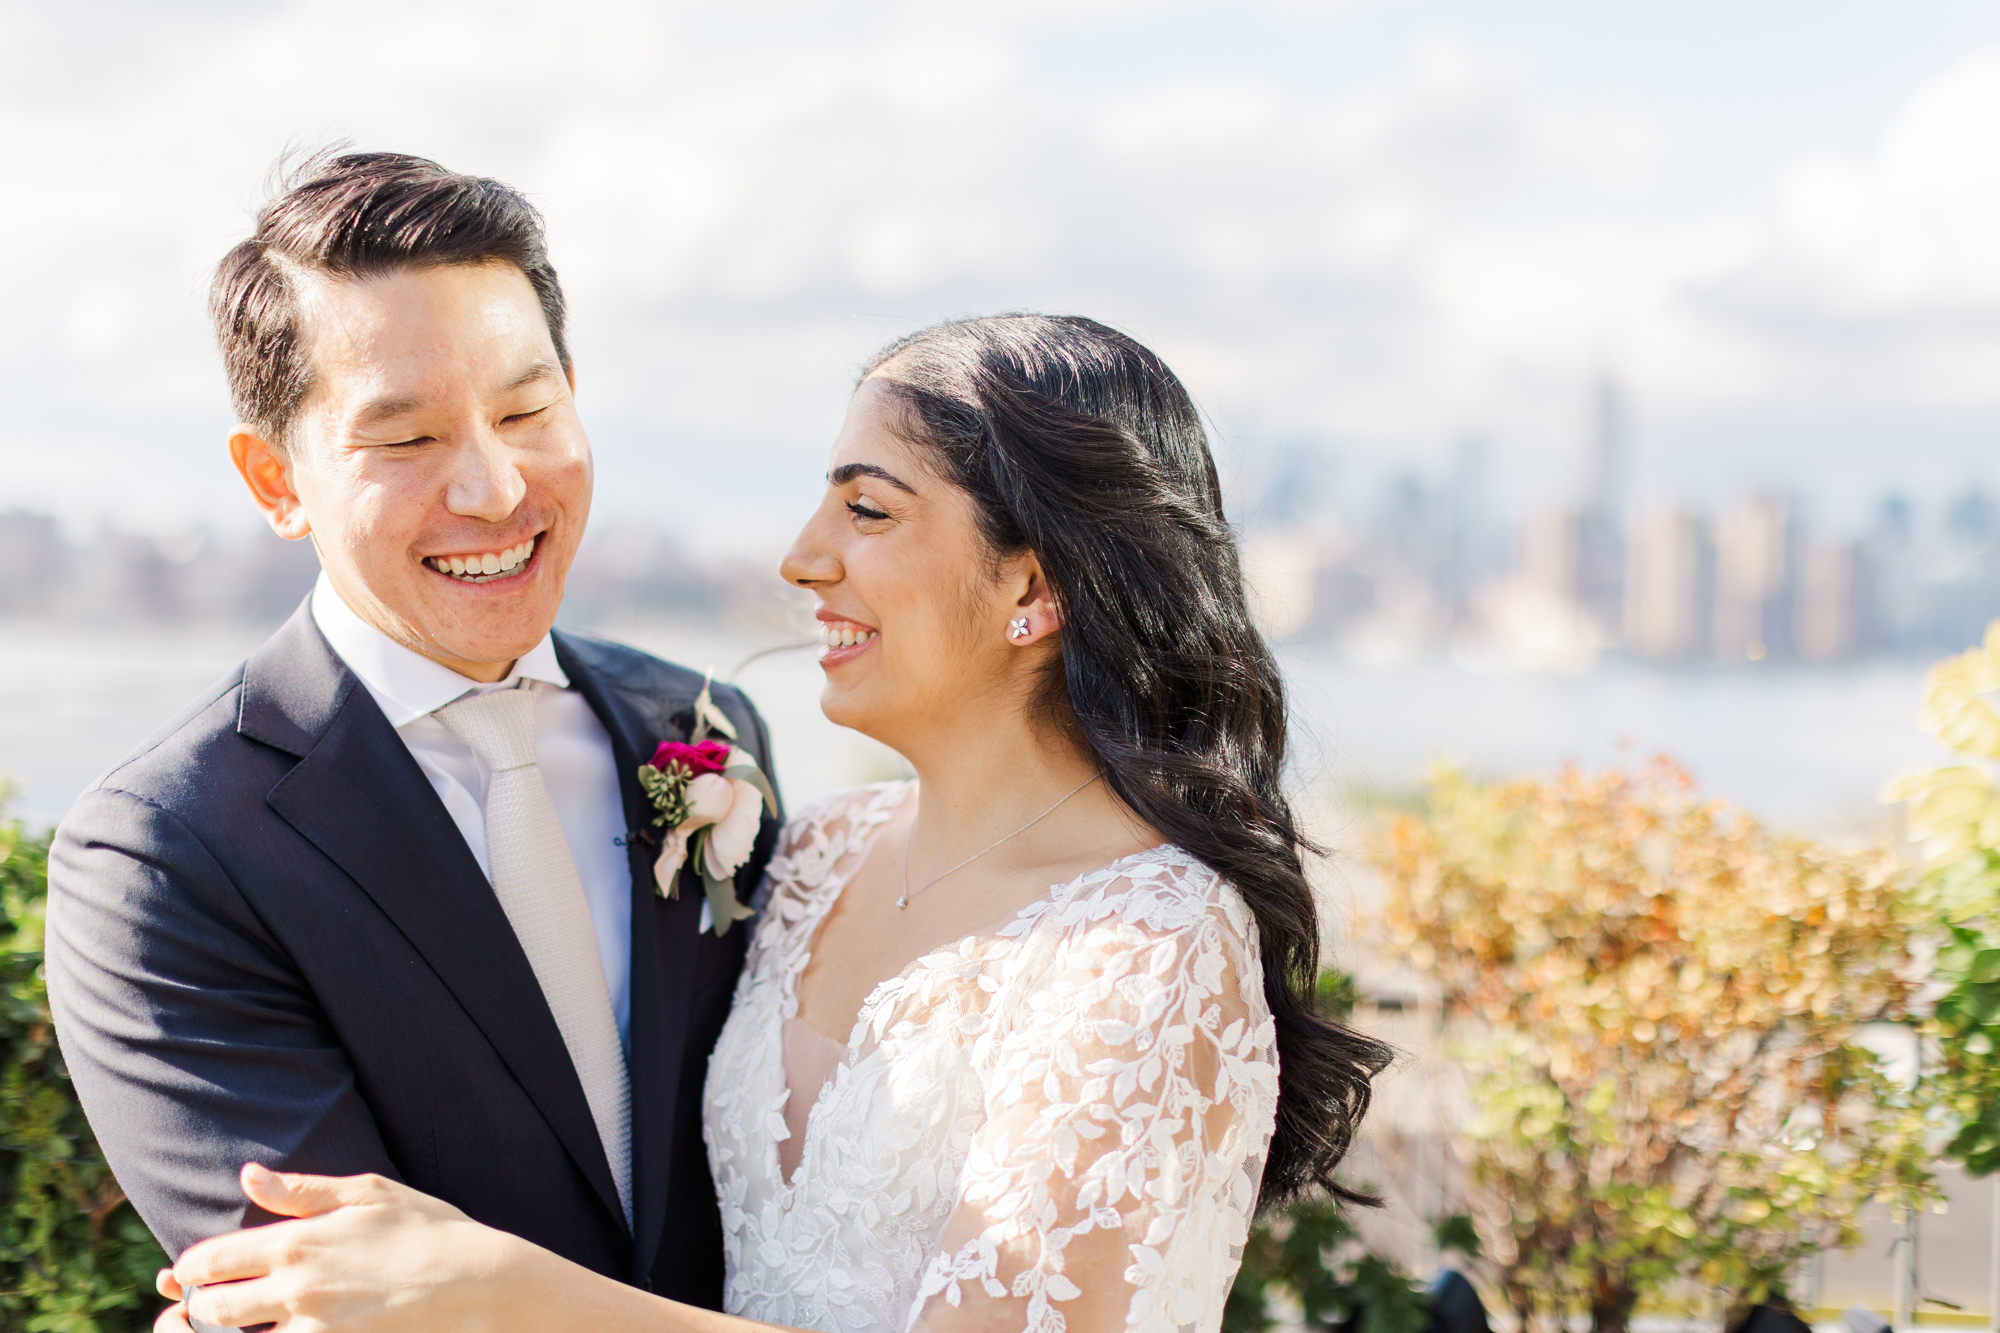 The Cost of New York Photographers for a Special Elopement